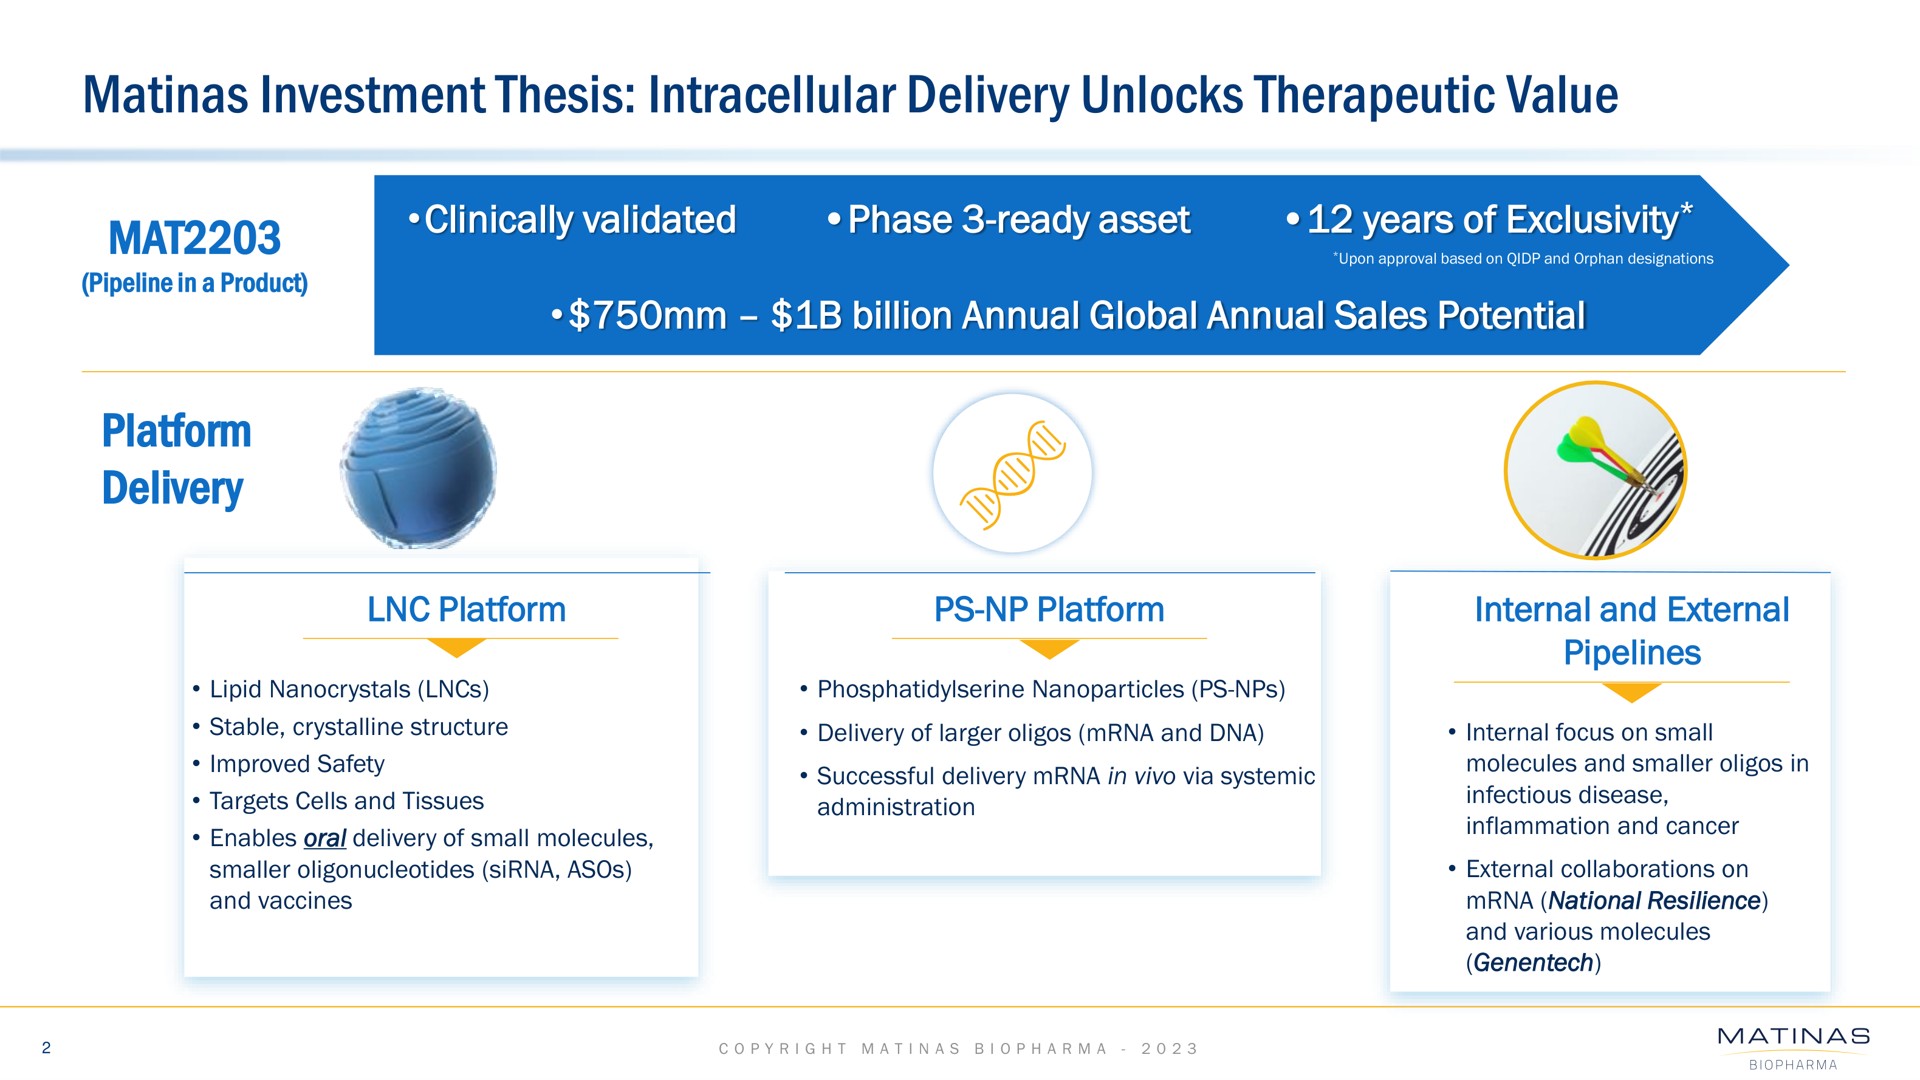 investment thesis intracellular delivery unlocks therapeutic value | Matinas BioPharma